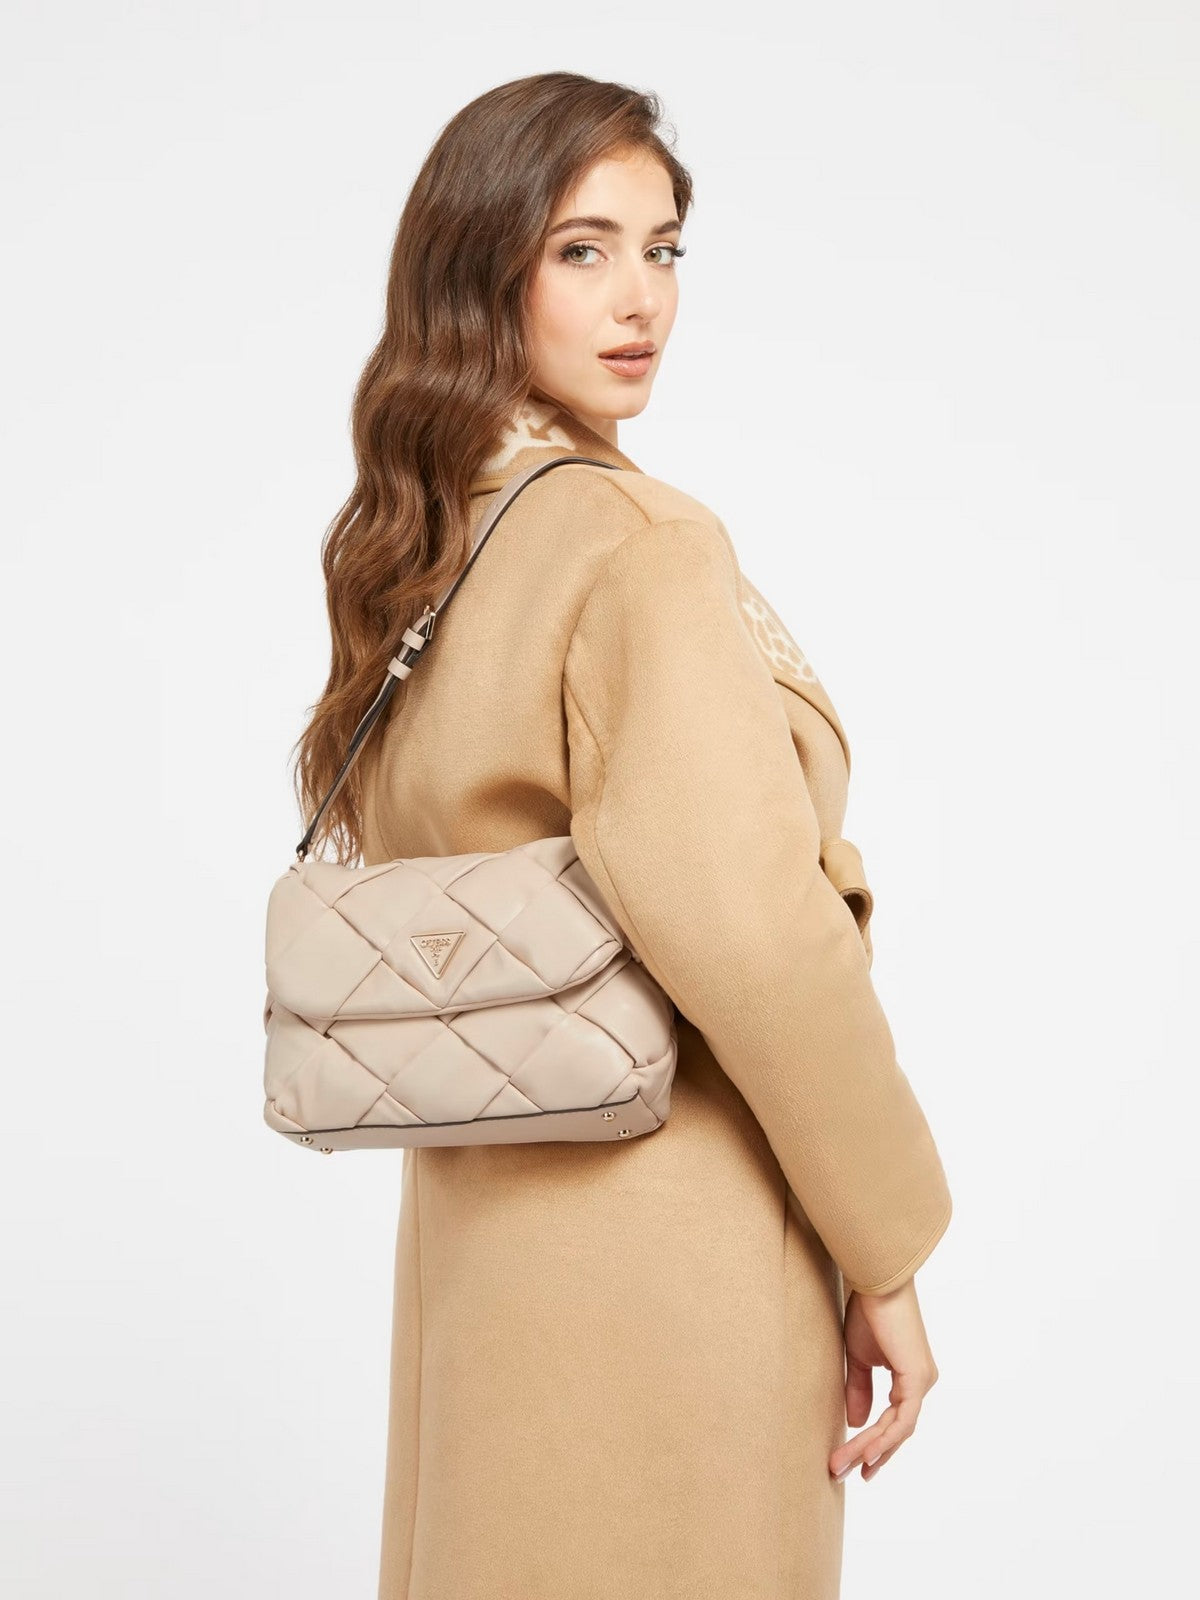 Sac pour femmes GUESS HWWG89 86190 STO Beige